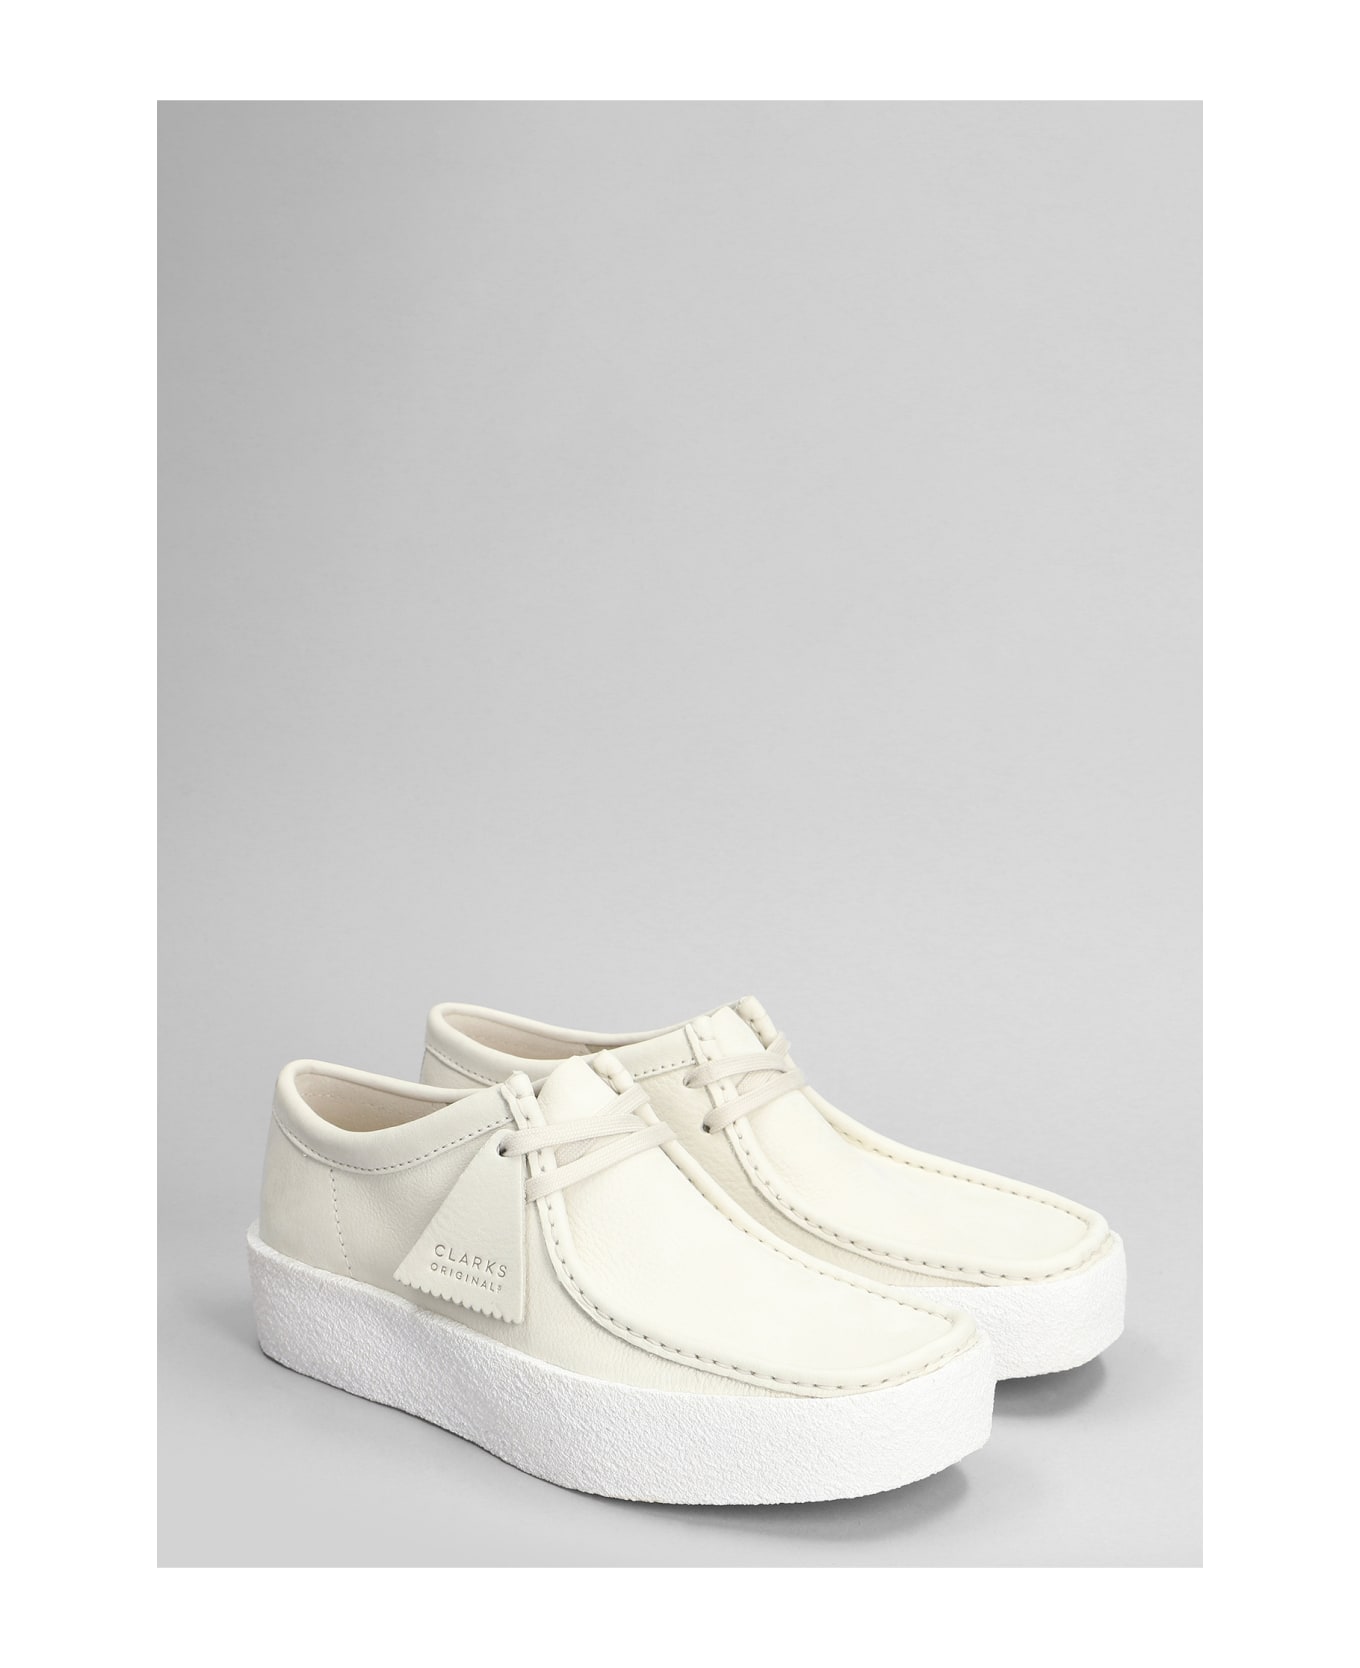 Clarks Wallabee Cup Lace Up Shoes In White Nubuck - white